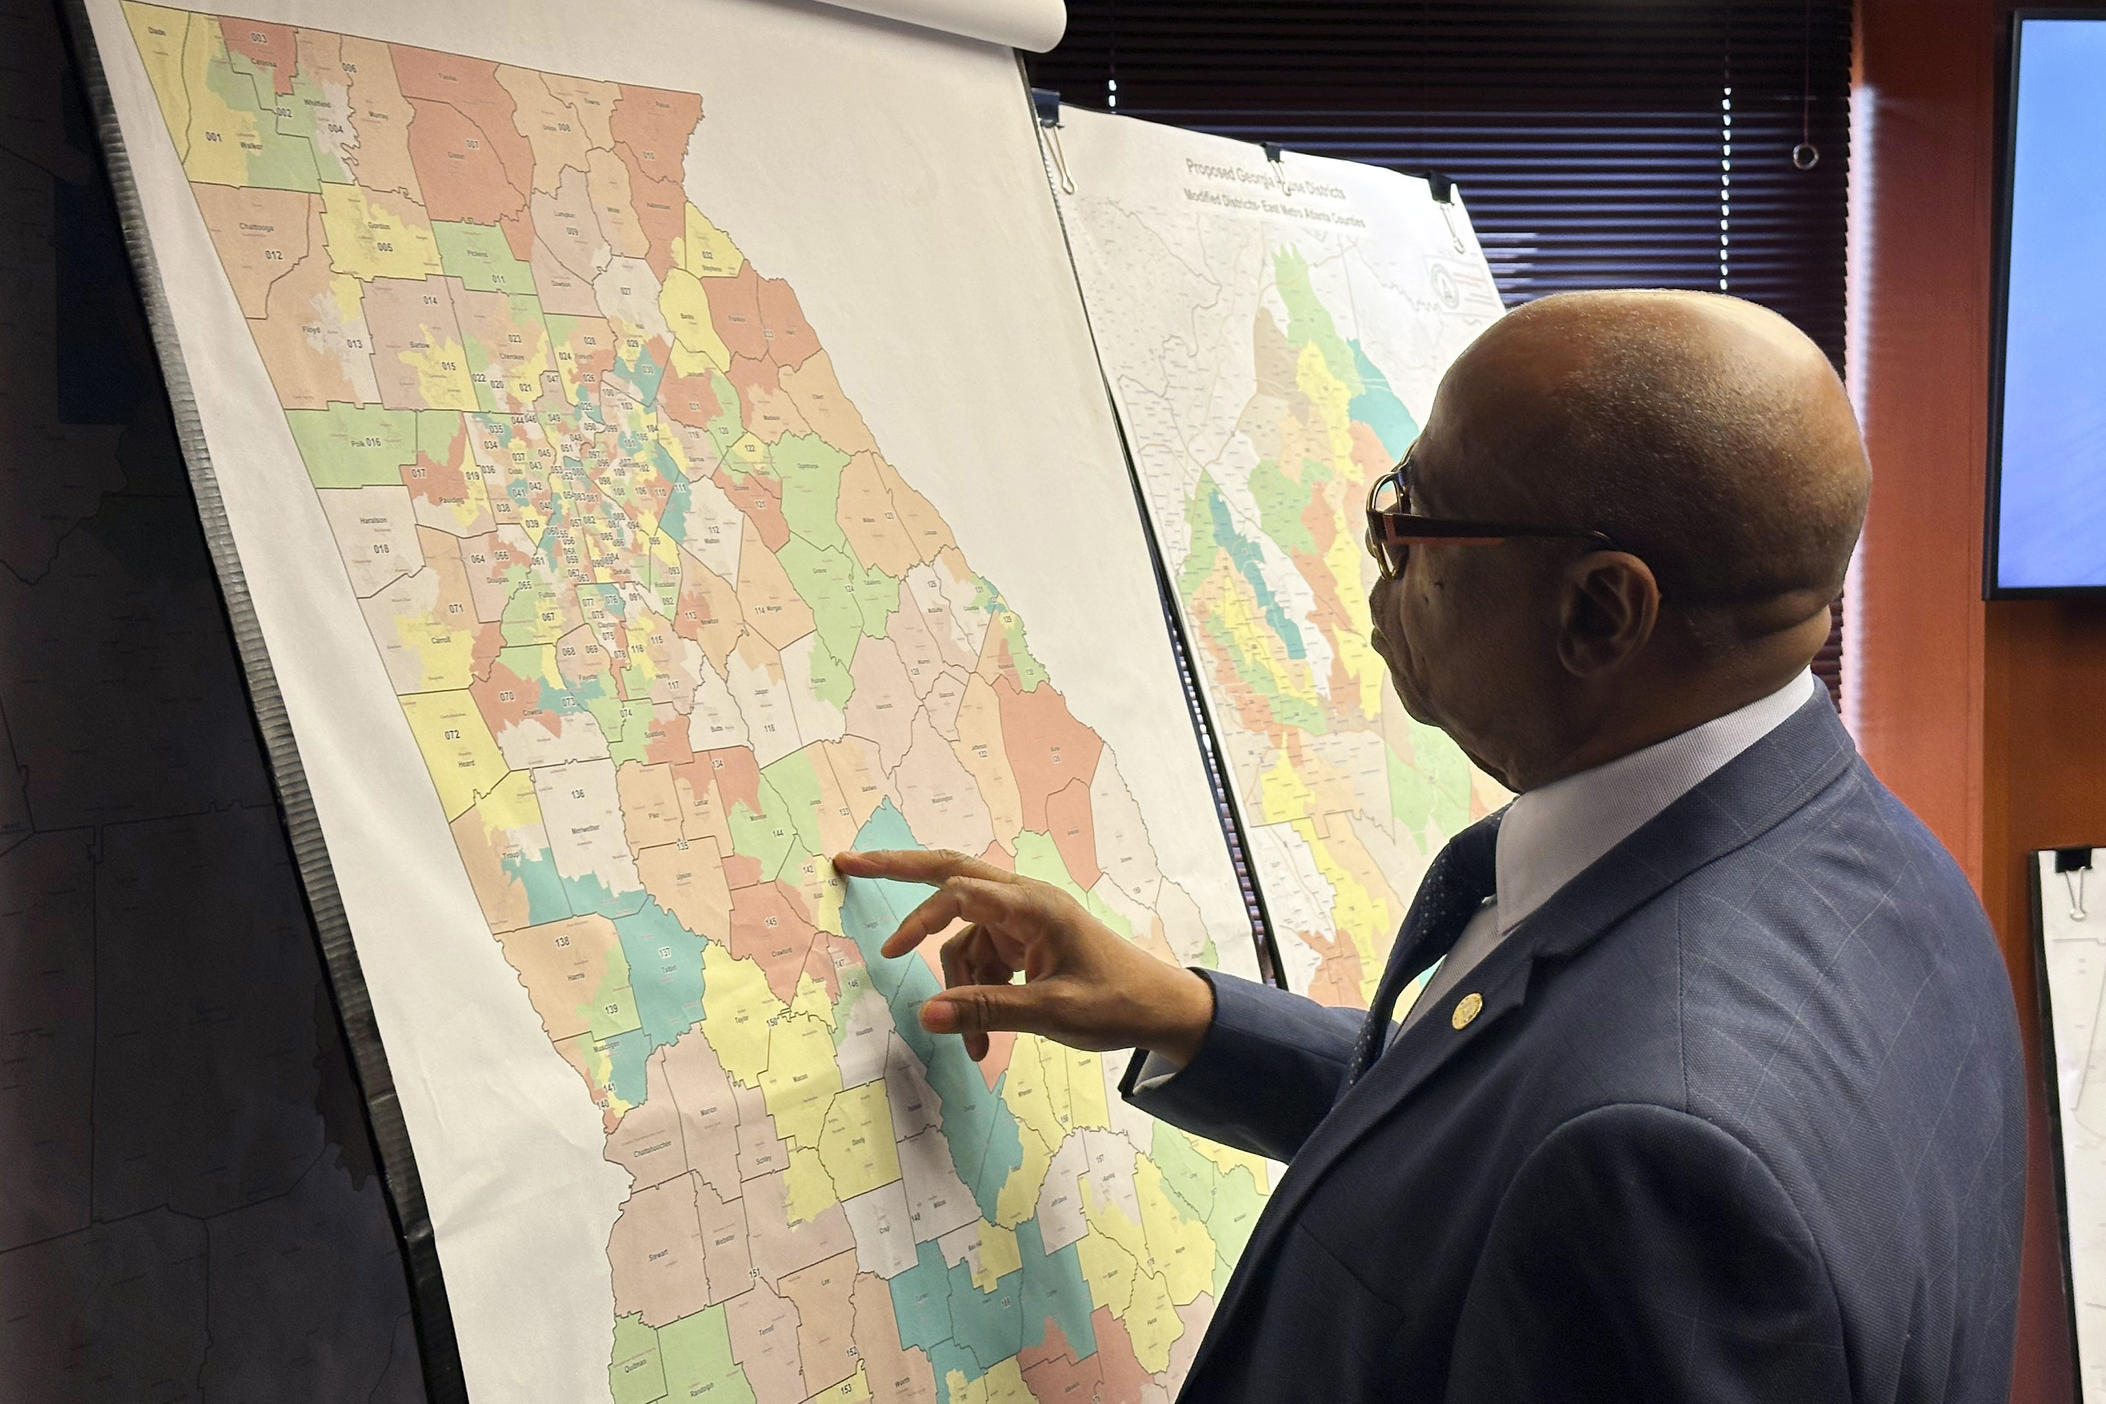 Georgia state Rep. Mack Jackson, D-Sandersville, looks at a map of proposed state House districts before a House hearing, Wednesday, Nov. 29, 2023, at the Georgia Capitol in Atlanta. State lawmakers were ordered to redraw Georgia's legislative and congressional districts after a federal judge ruled some illegally diluted Black voting strength. (AP Photo/Jeff Amy)